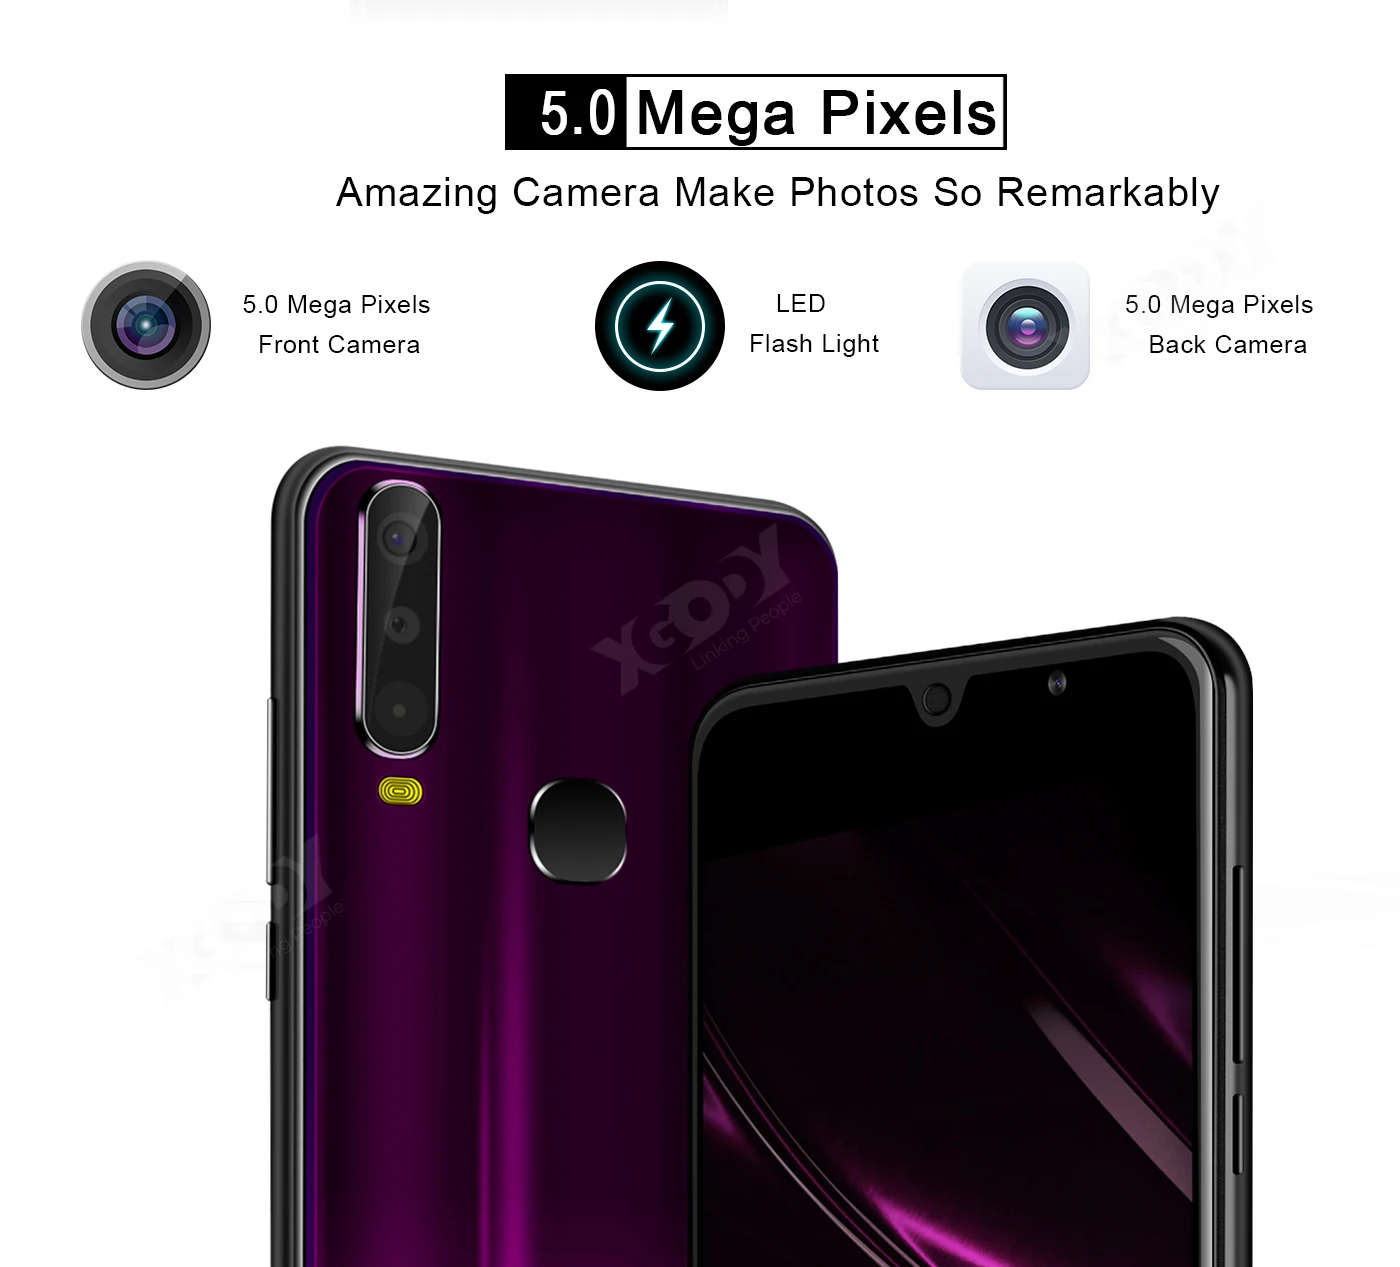 best gaming cellphones XGODY Celular Smartphone Android 8.1 6 Inch MTK6580 Quad Core 2GB 16GB Cell Phone Dual SIM 5MP Camera GPS WiFi 3G Mobile Phones best android cell phone